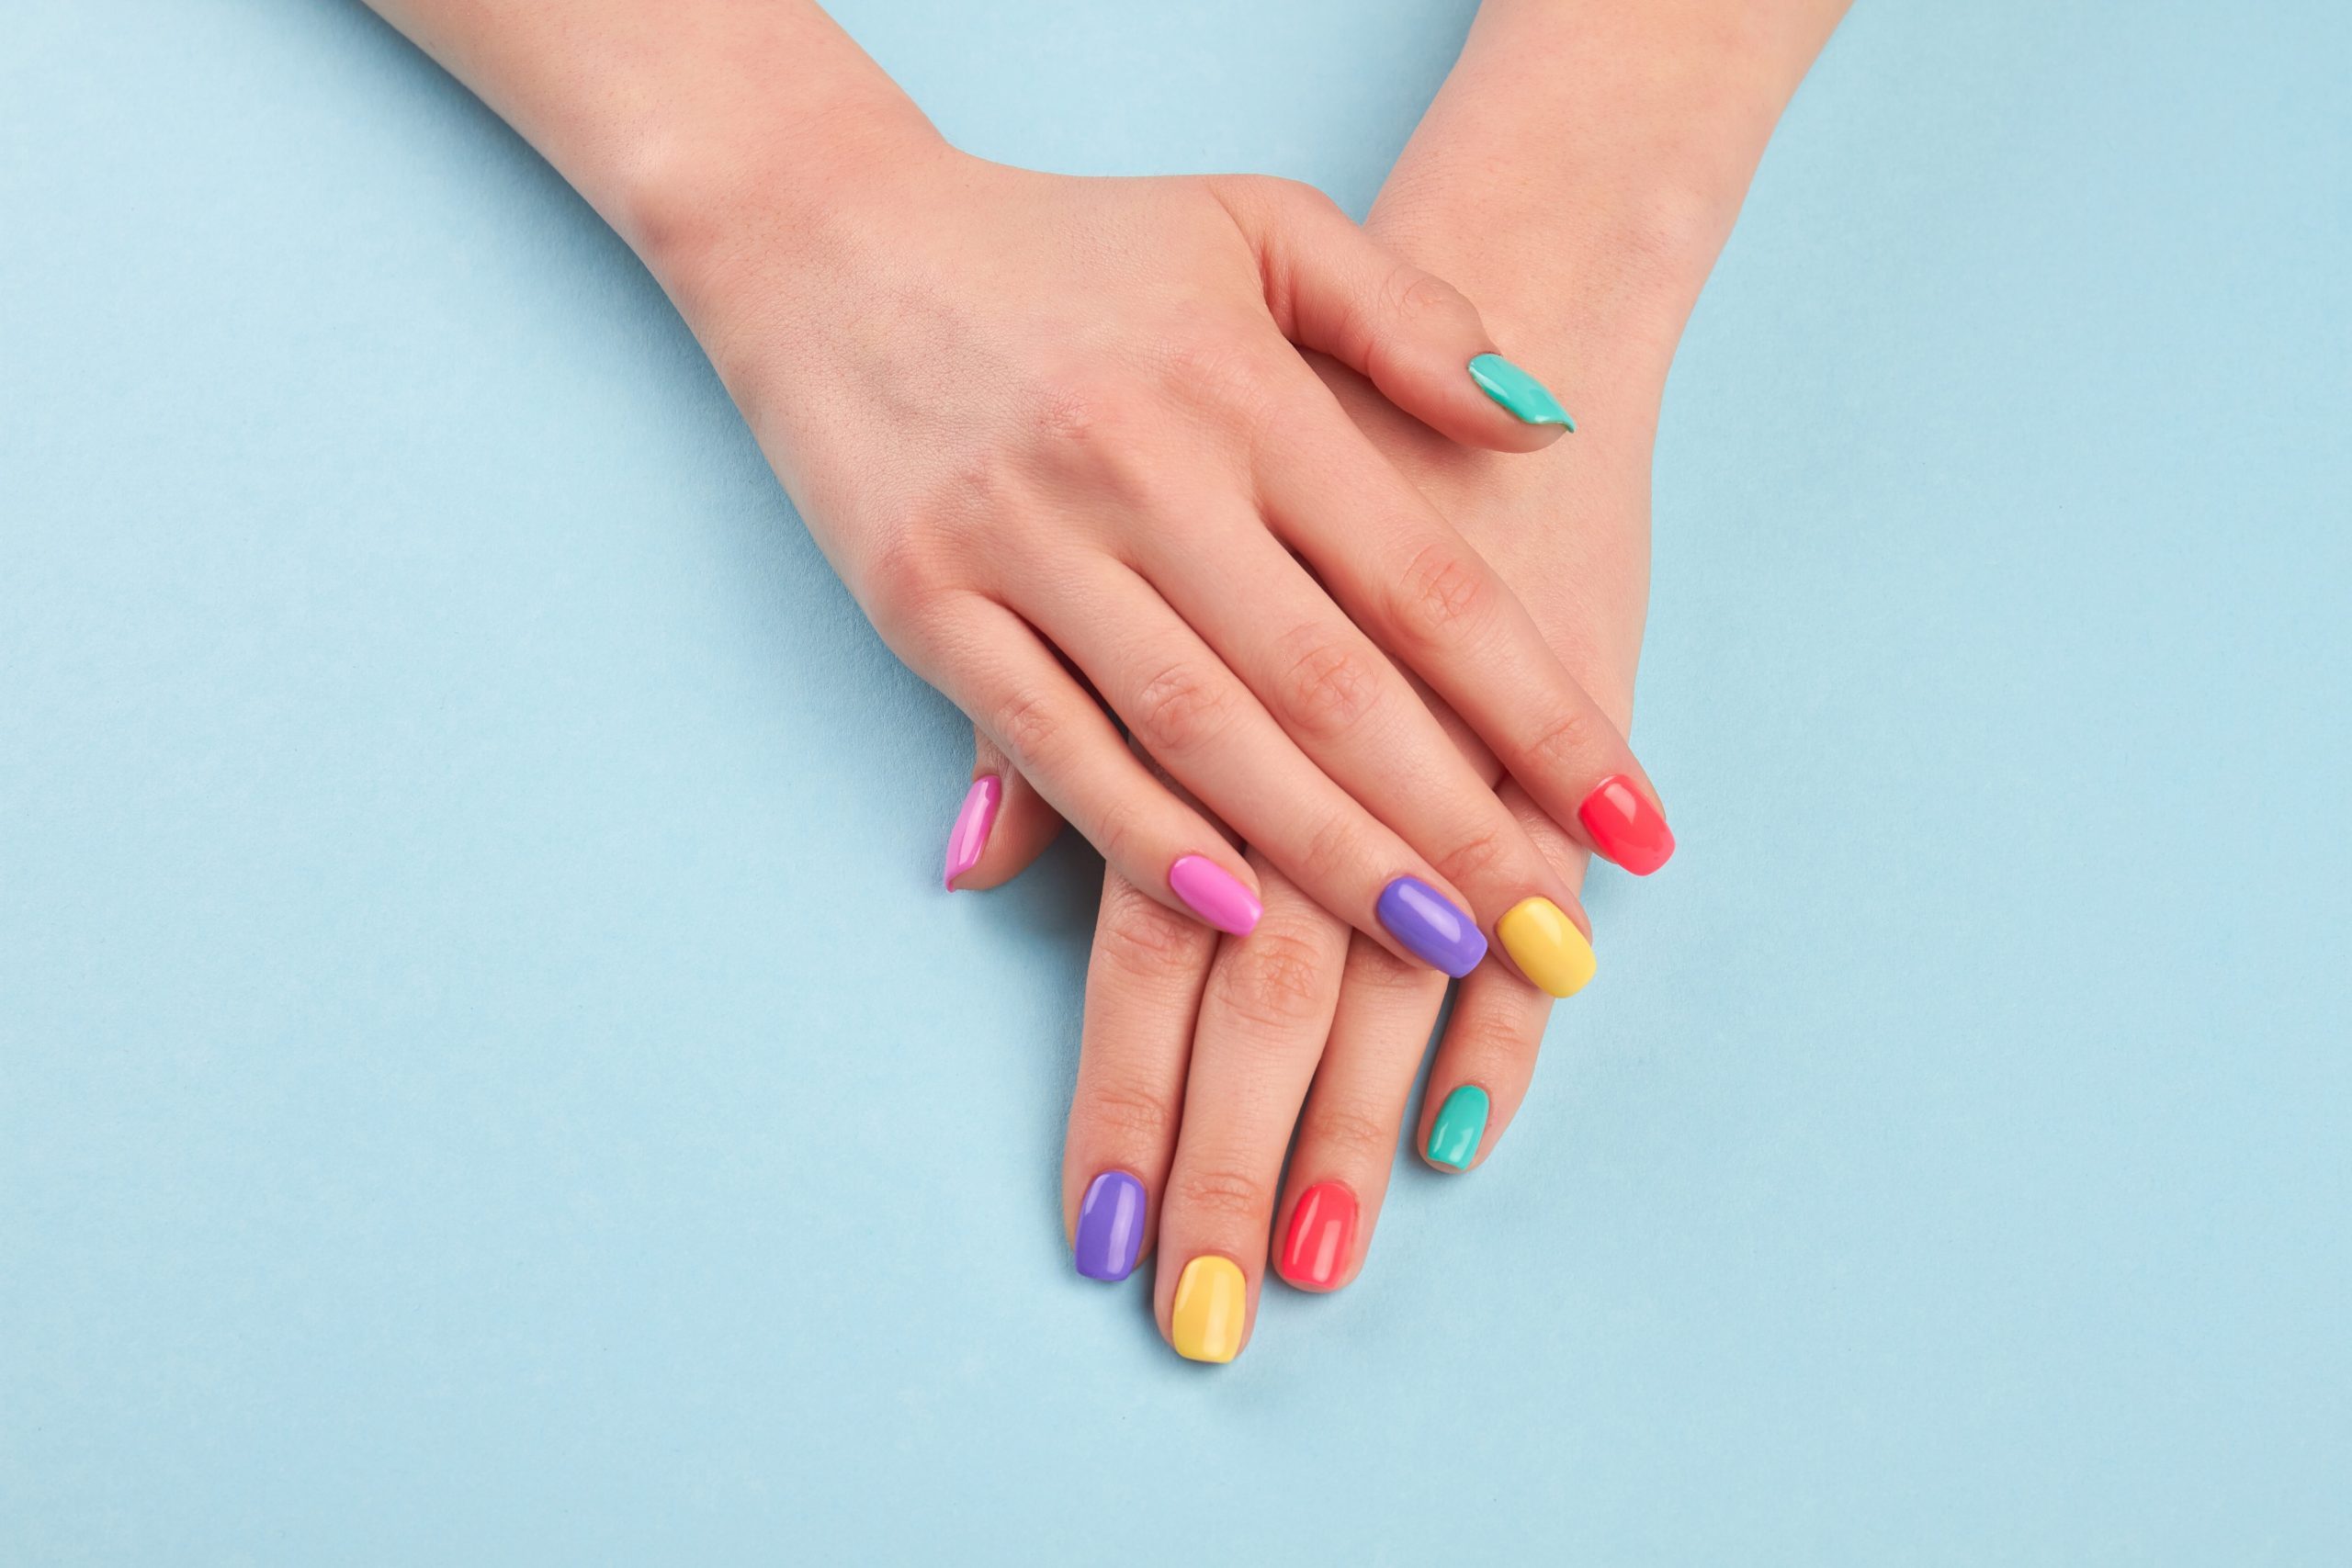 Remove Gel Nail Polish Without Destroying Your Nails | Reader's Digest